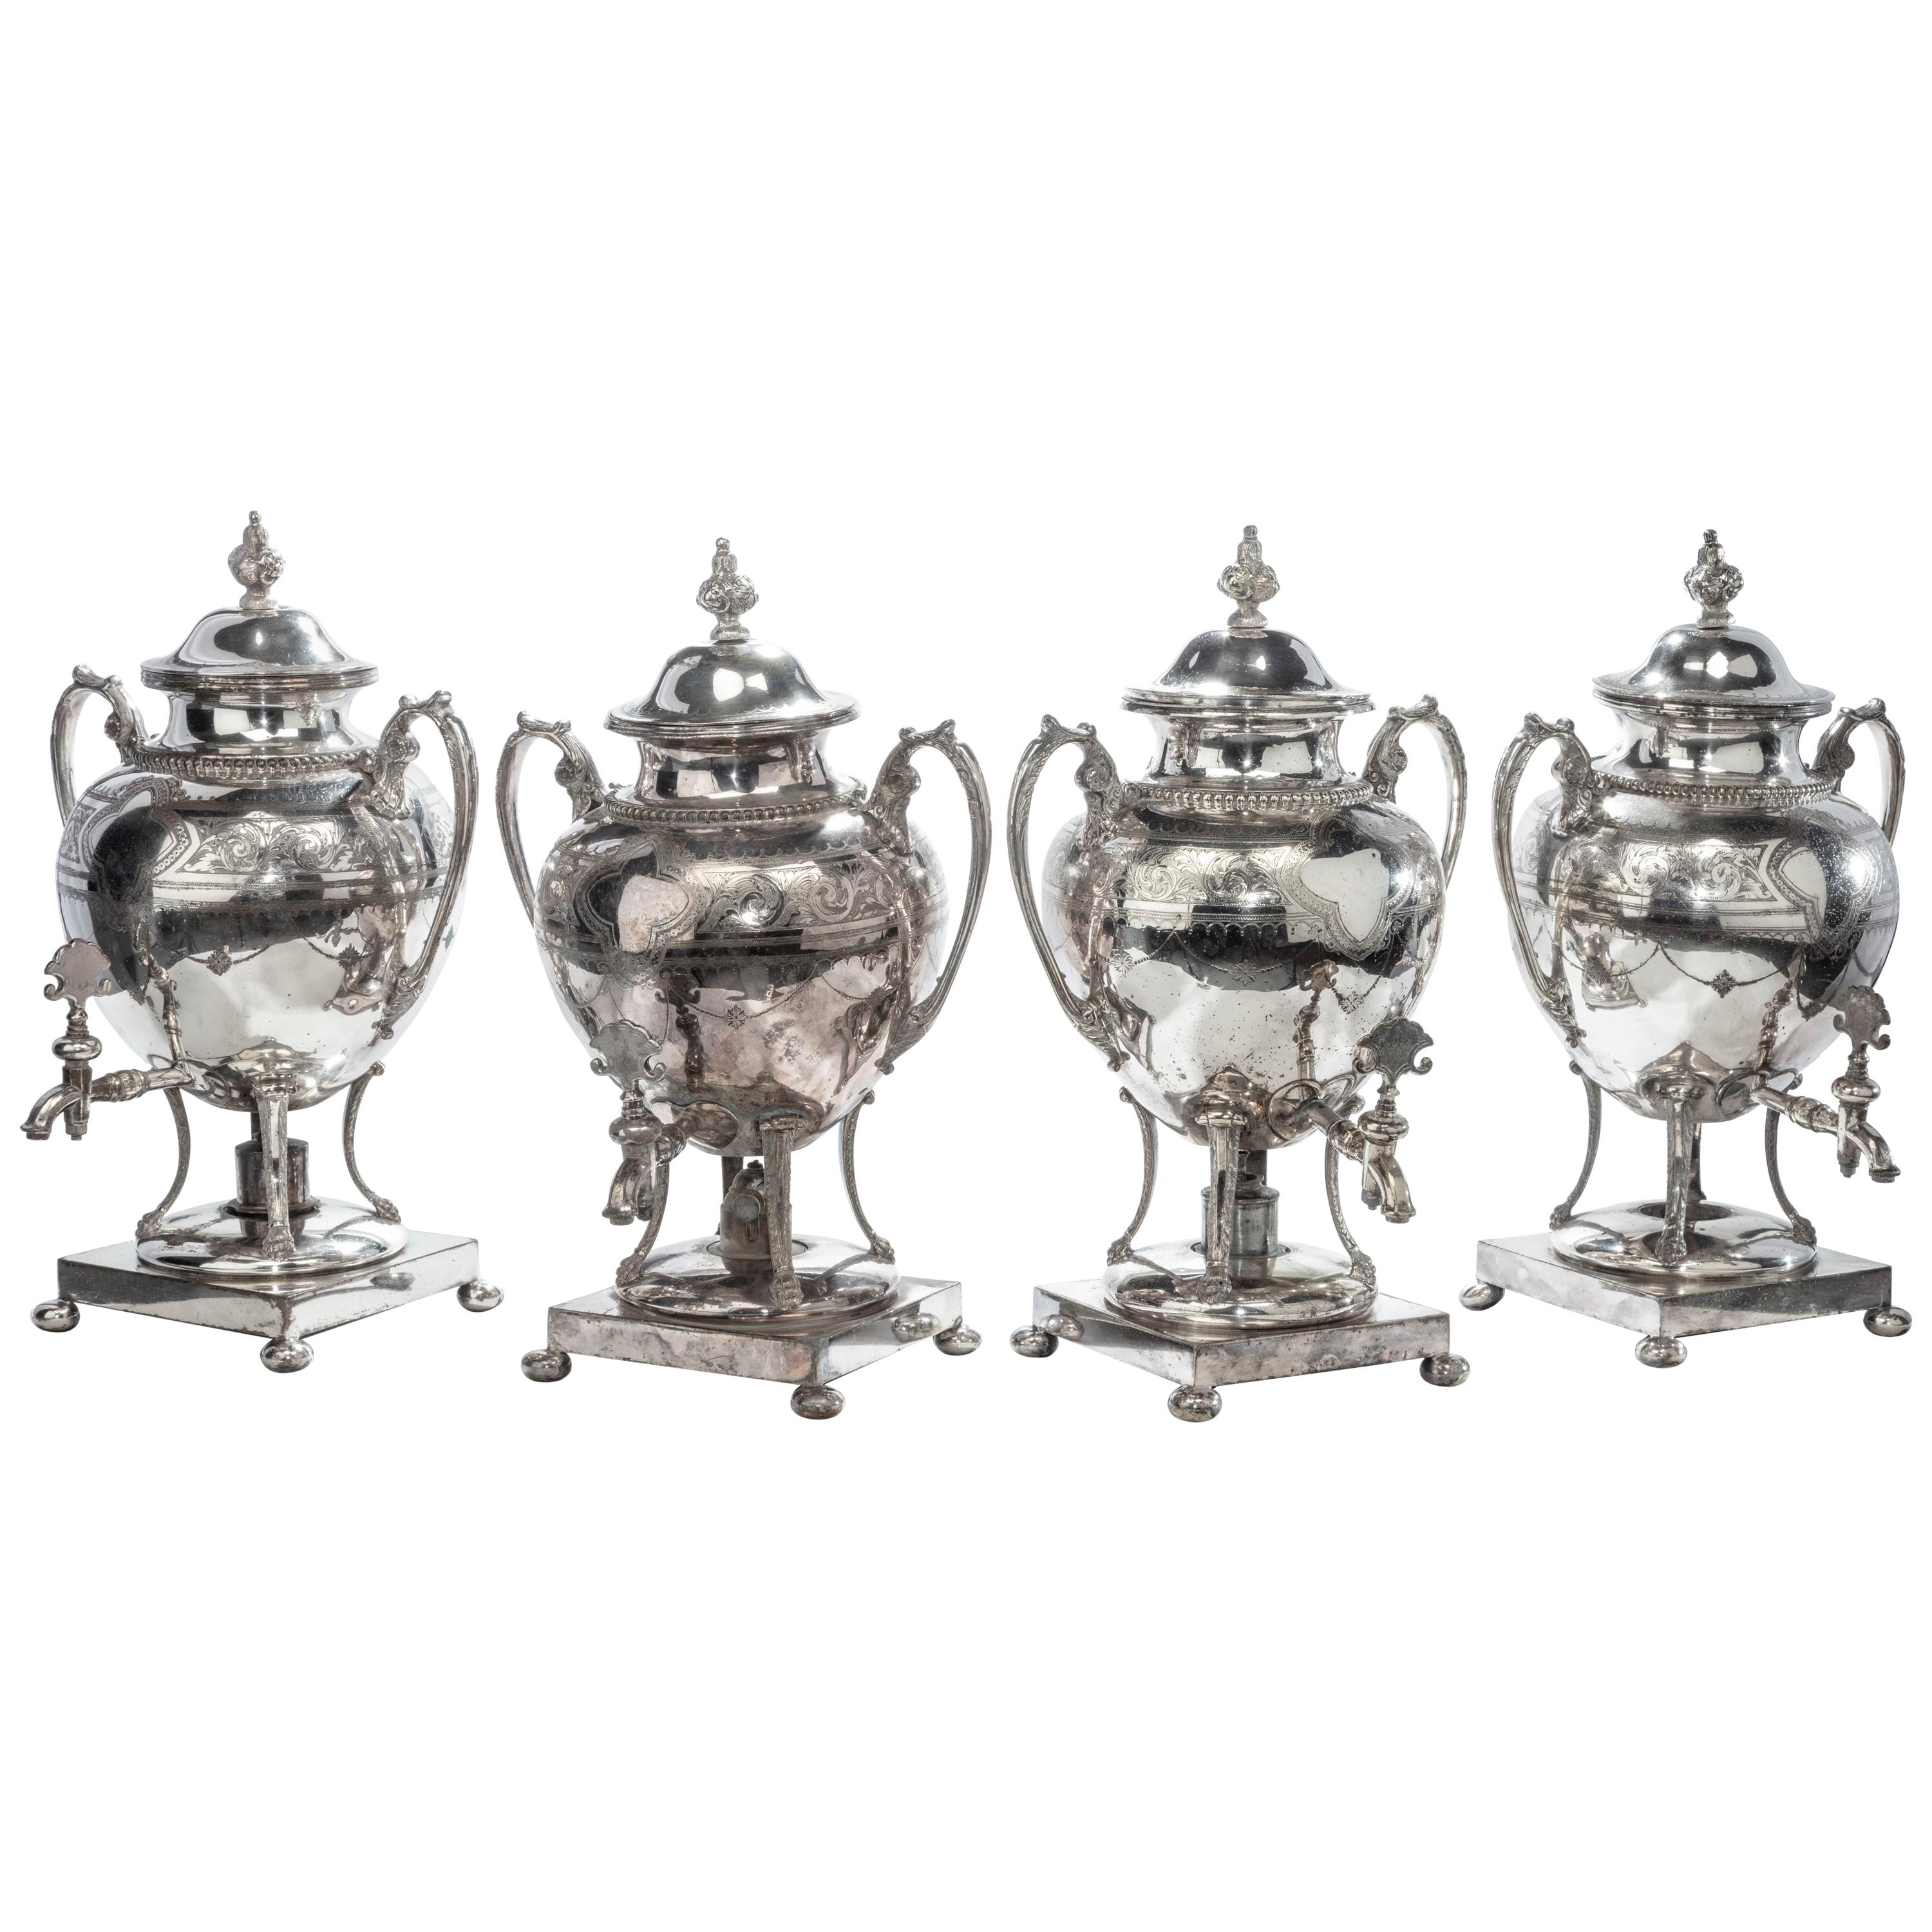 Rare Set of Four Late 19th Century Silver Plated Large Tea Urns